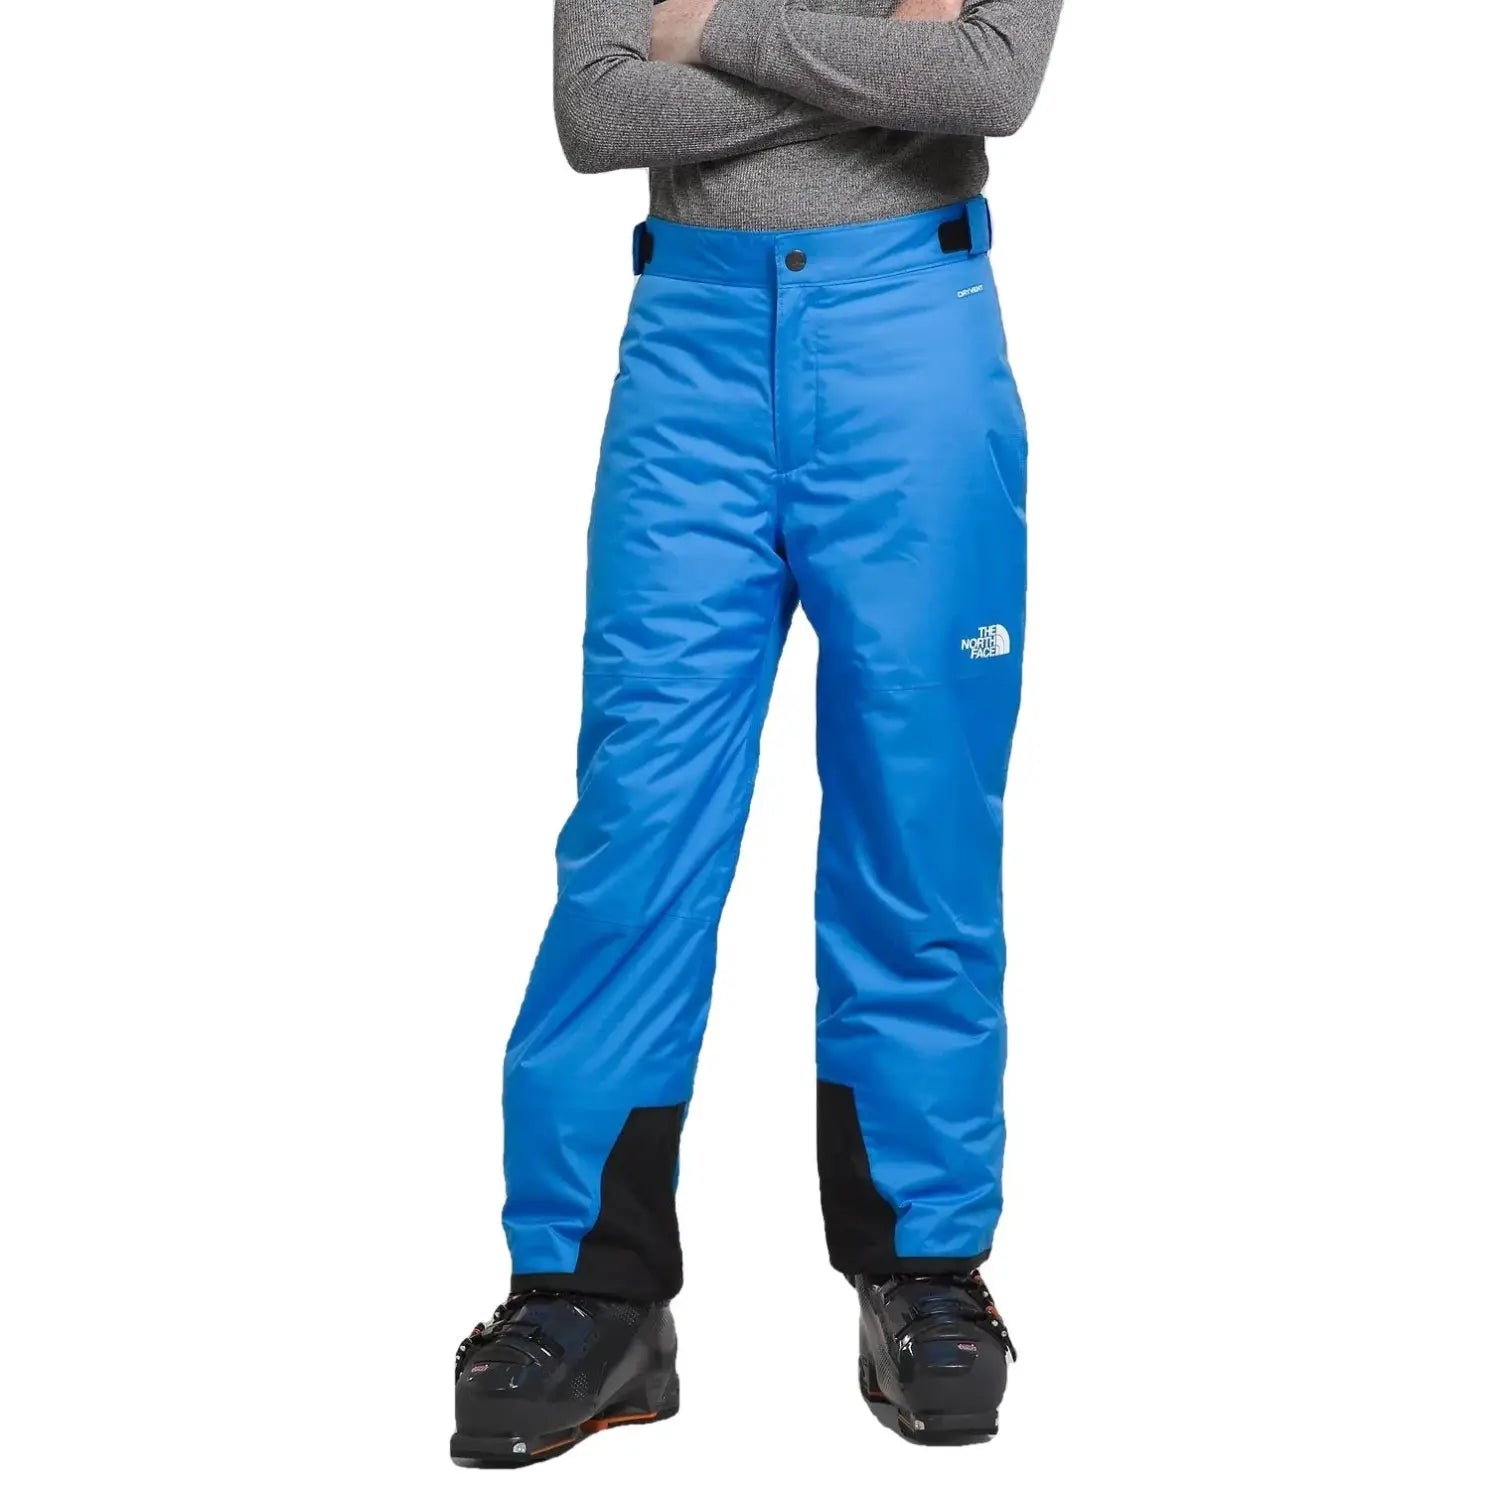 The North Face B's Freedom Insulated Pants, Optic Blue, front view on model